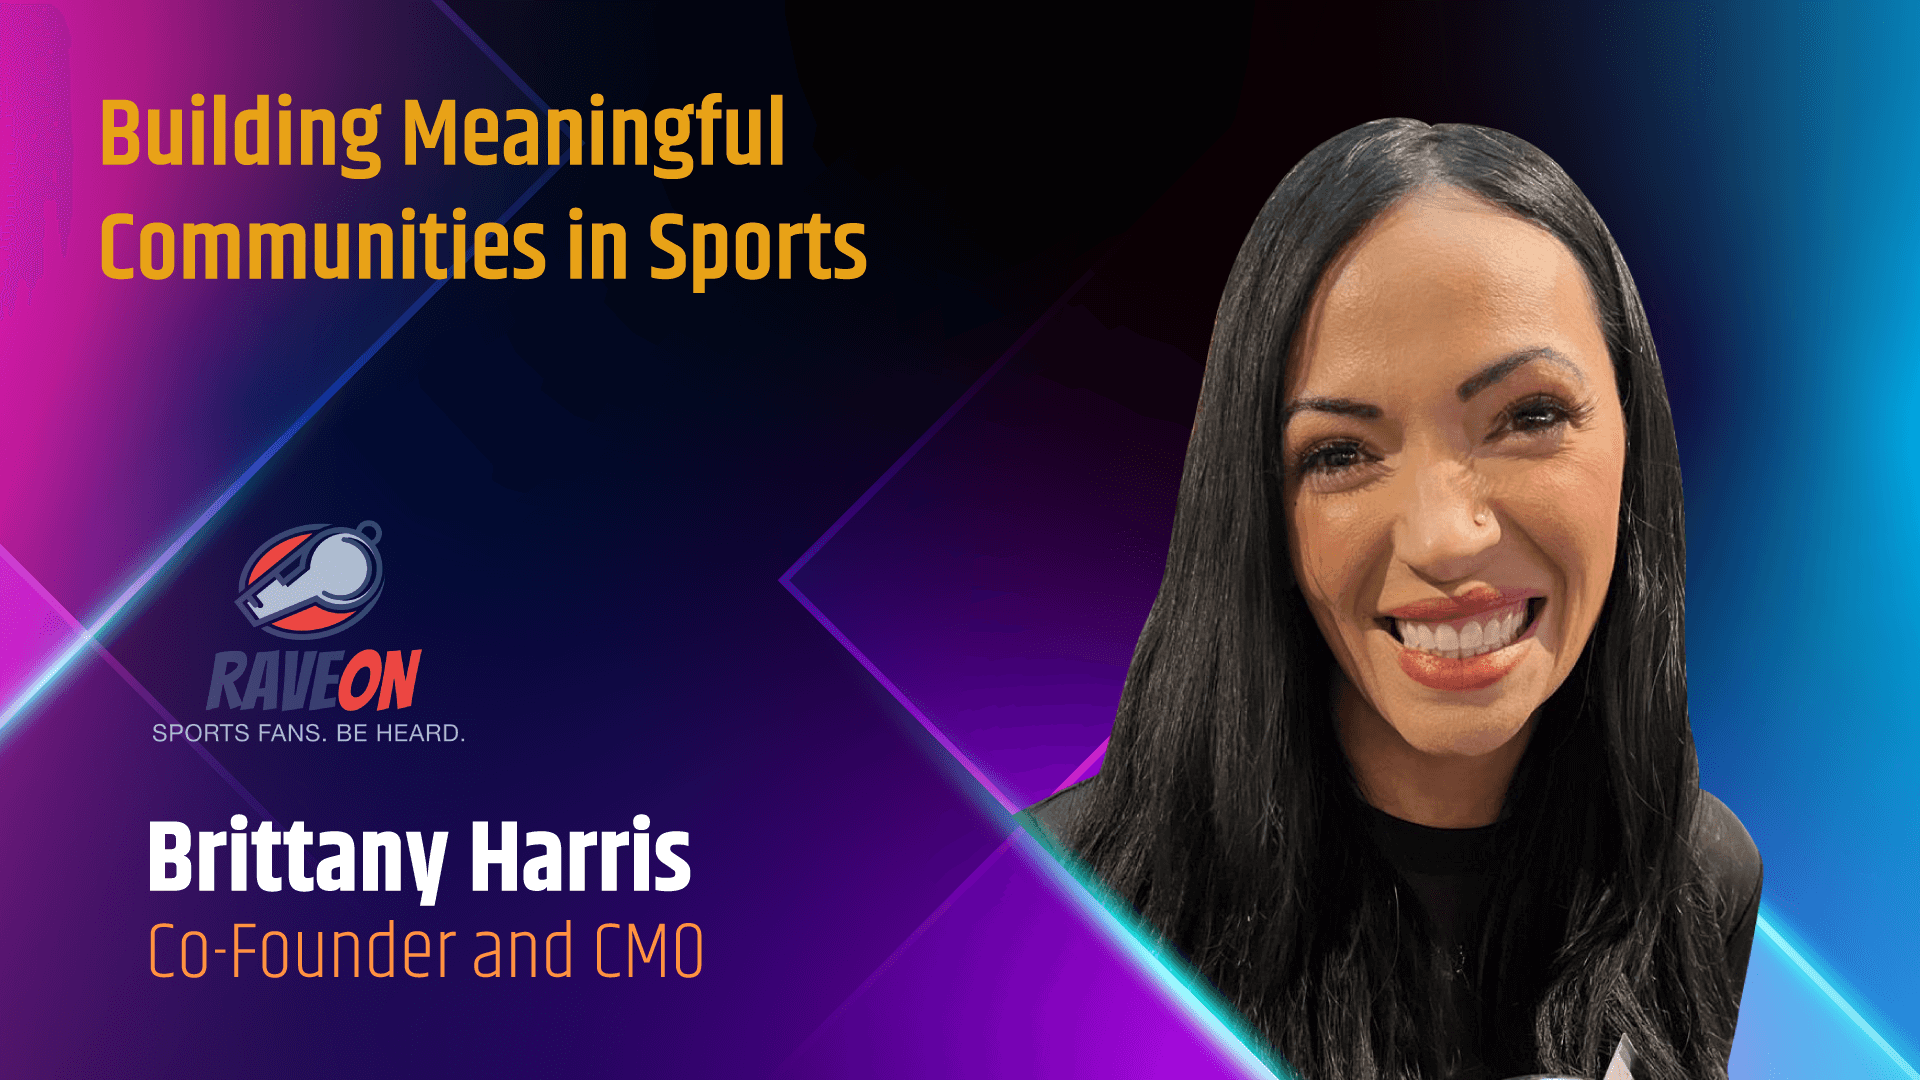 Brittany Harris - Co-Founder and CMO at RaveOn Sports